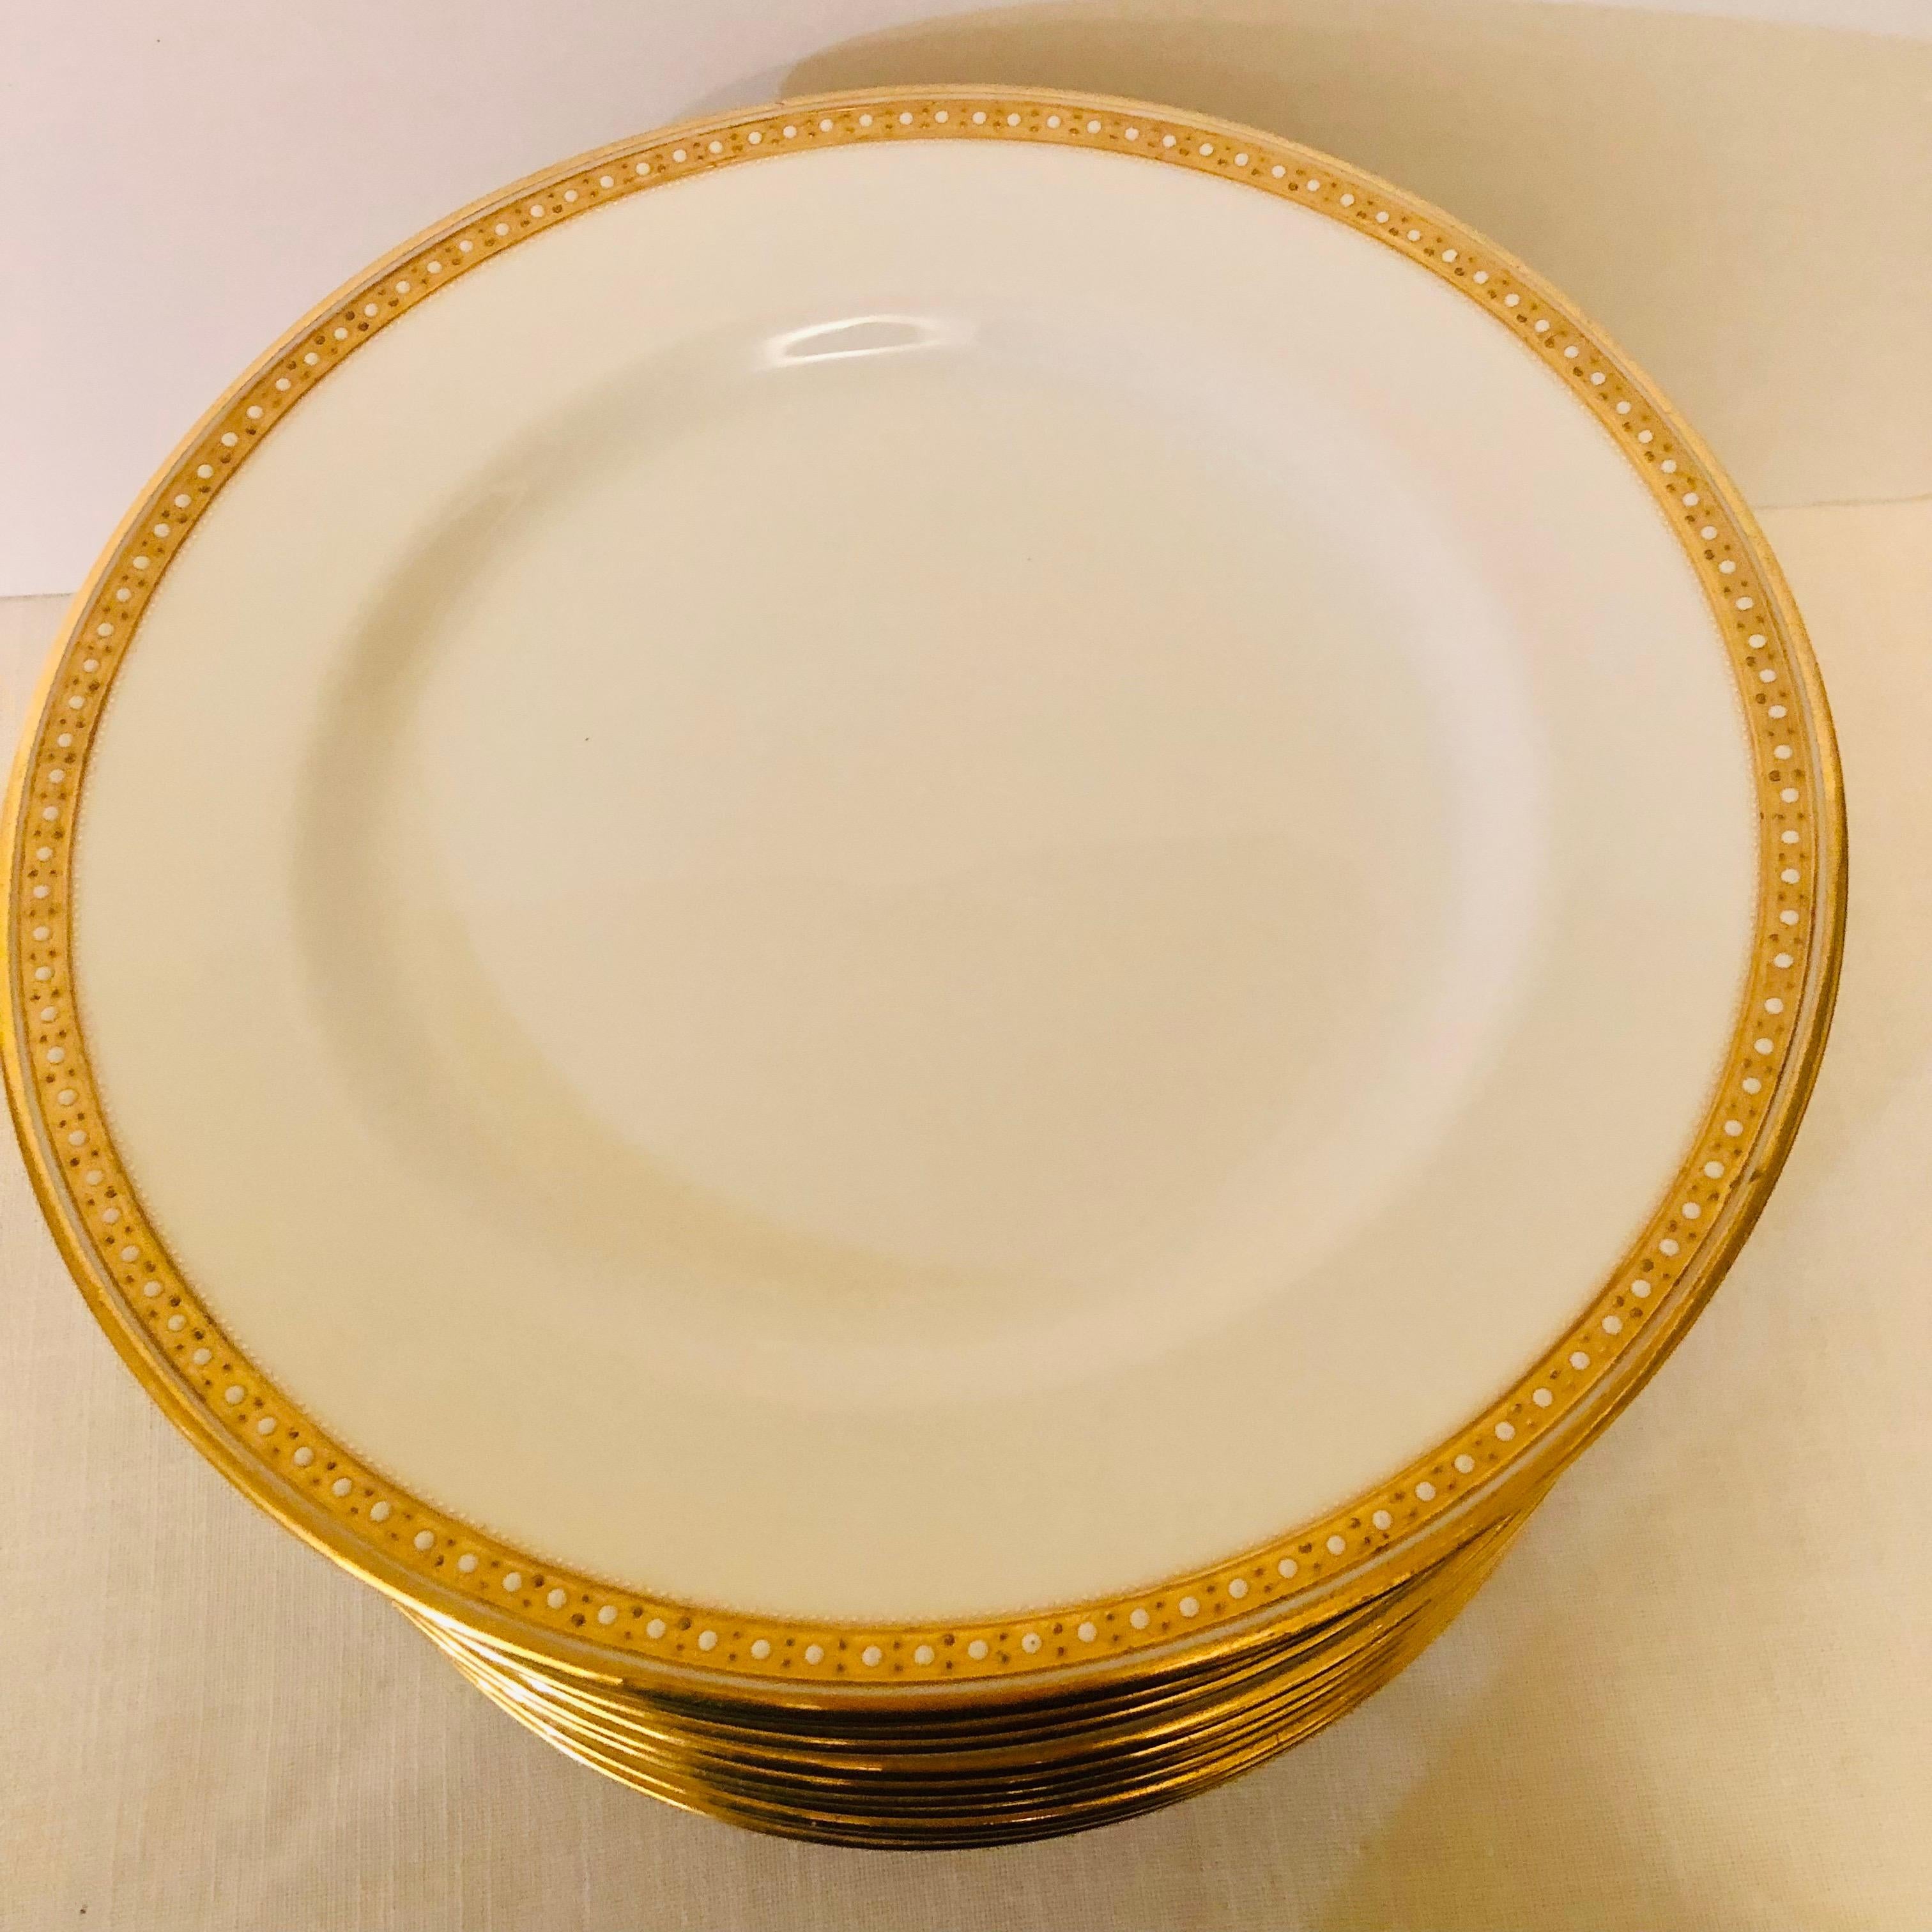 English Set of 19 Copeland Spode Dinner Plates With Gold Borders and White Jeweling 